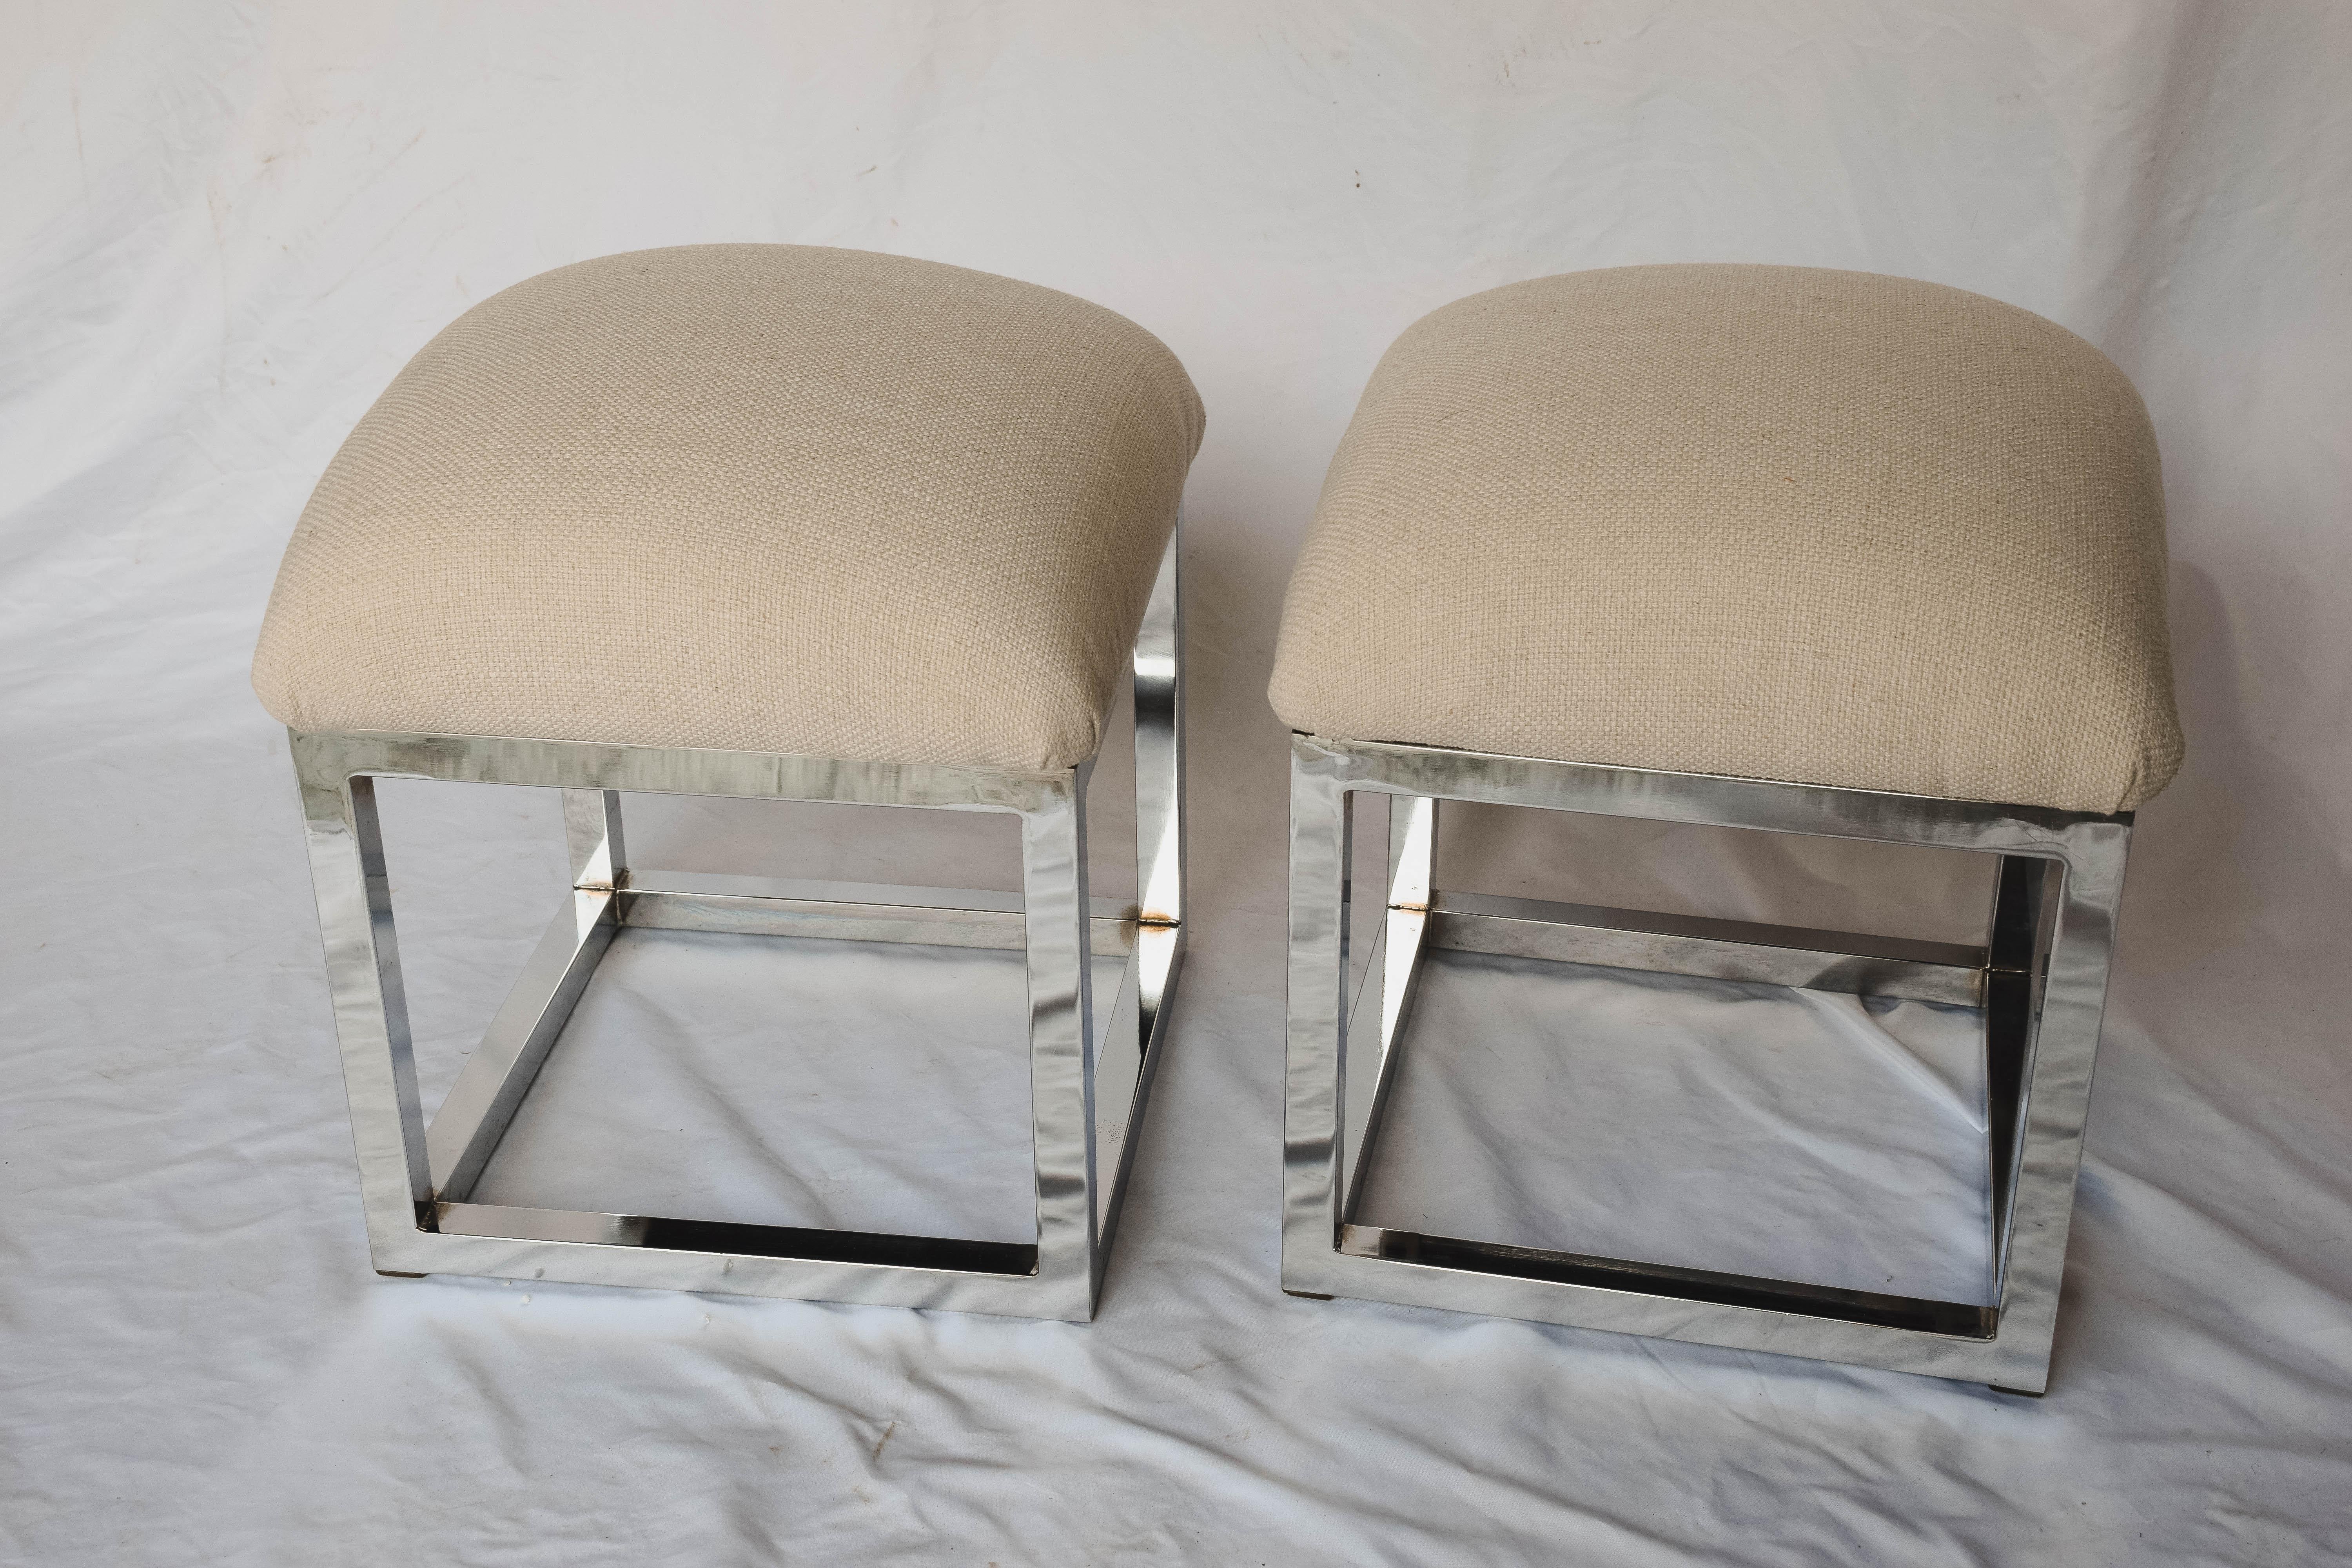 Pair of Mid-Century Modern Cube Chrome Ottomans Attributed to Milo Baughman 1